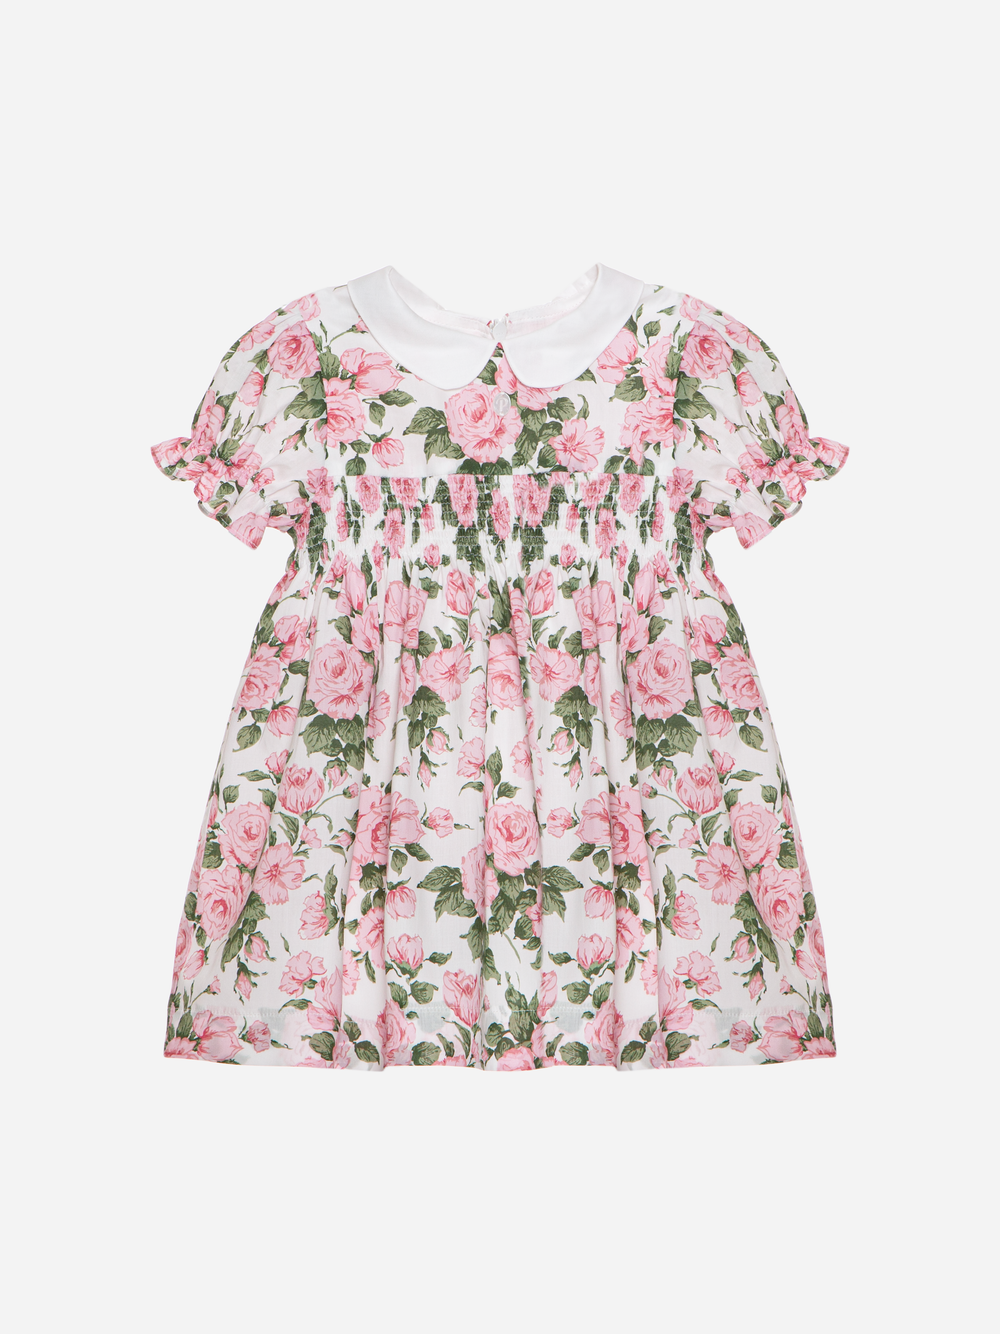  Liberty pink dress with exclusive flower print